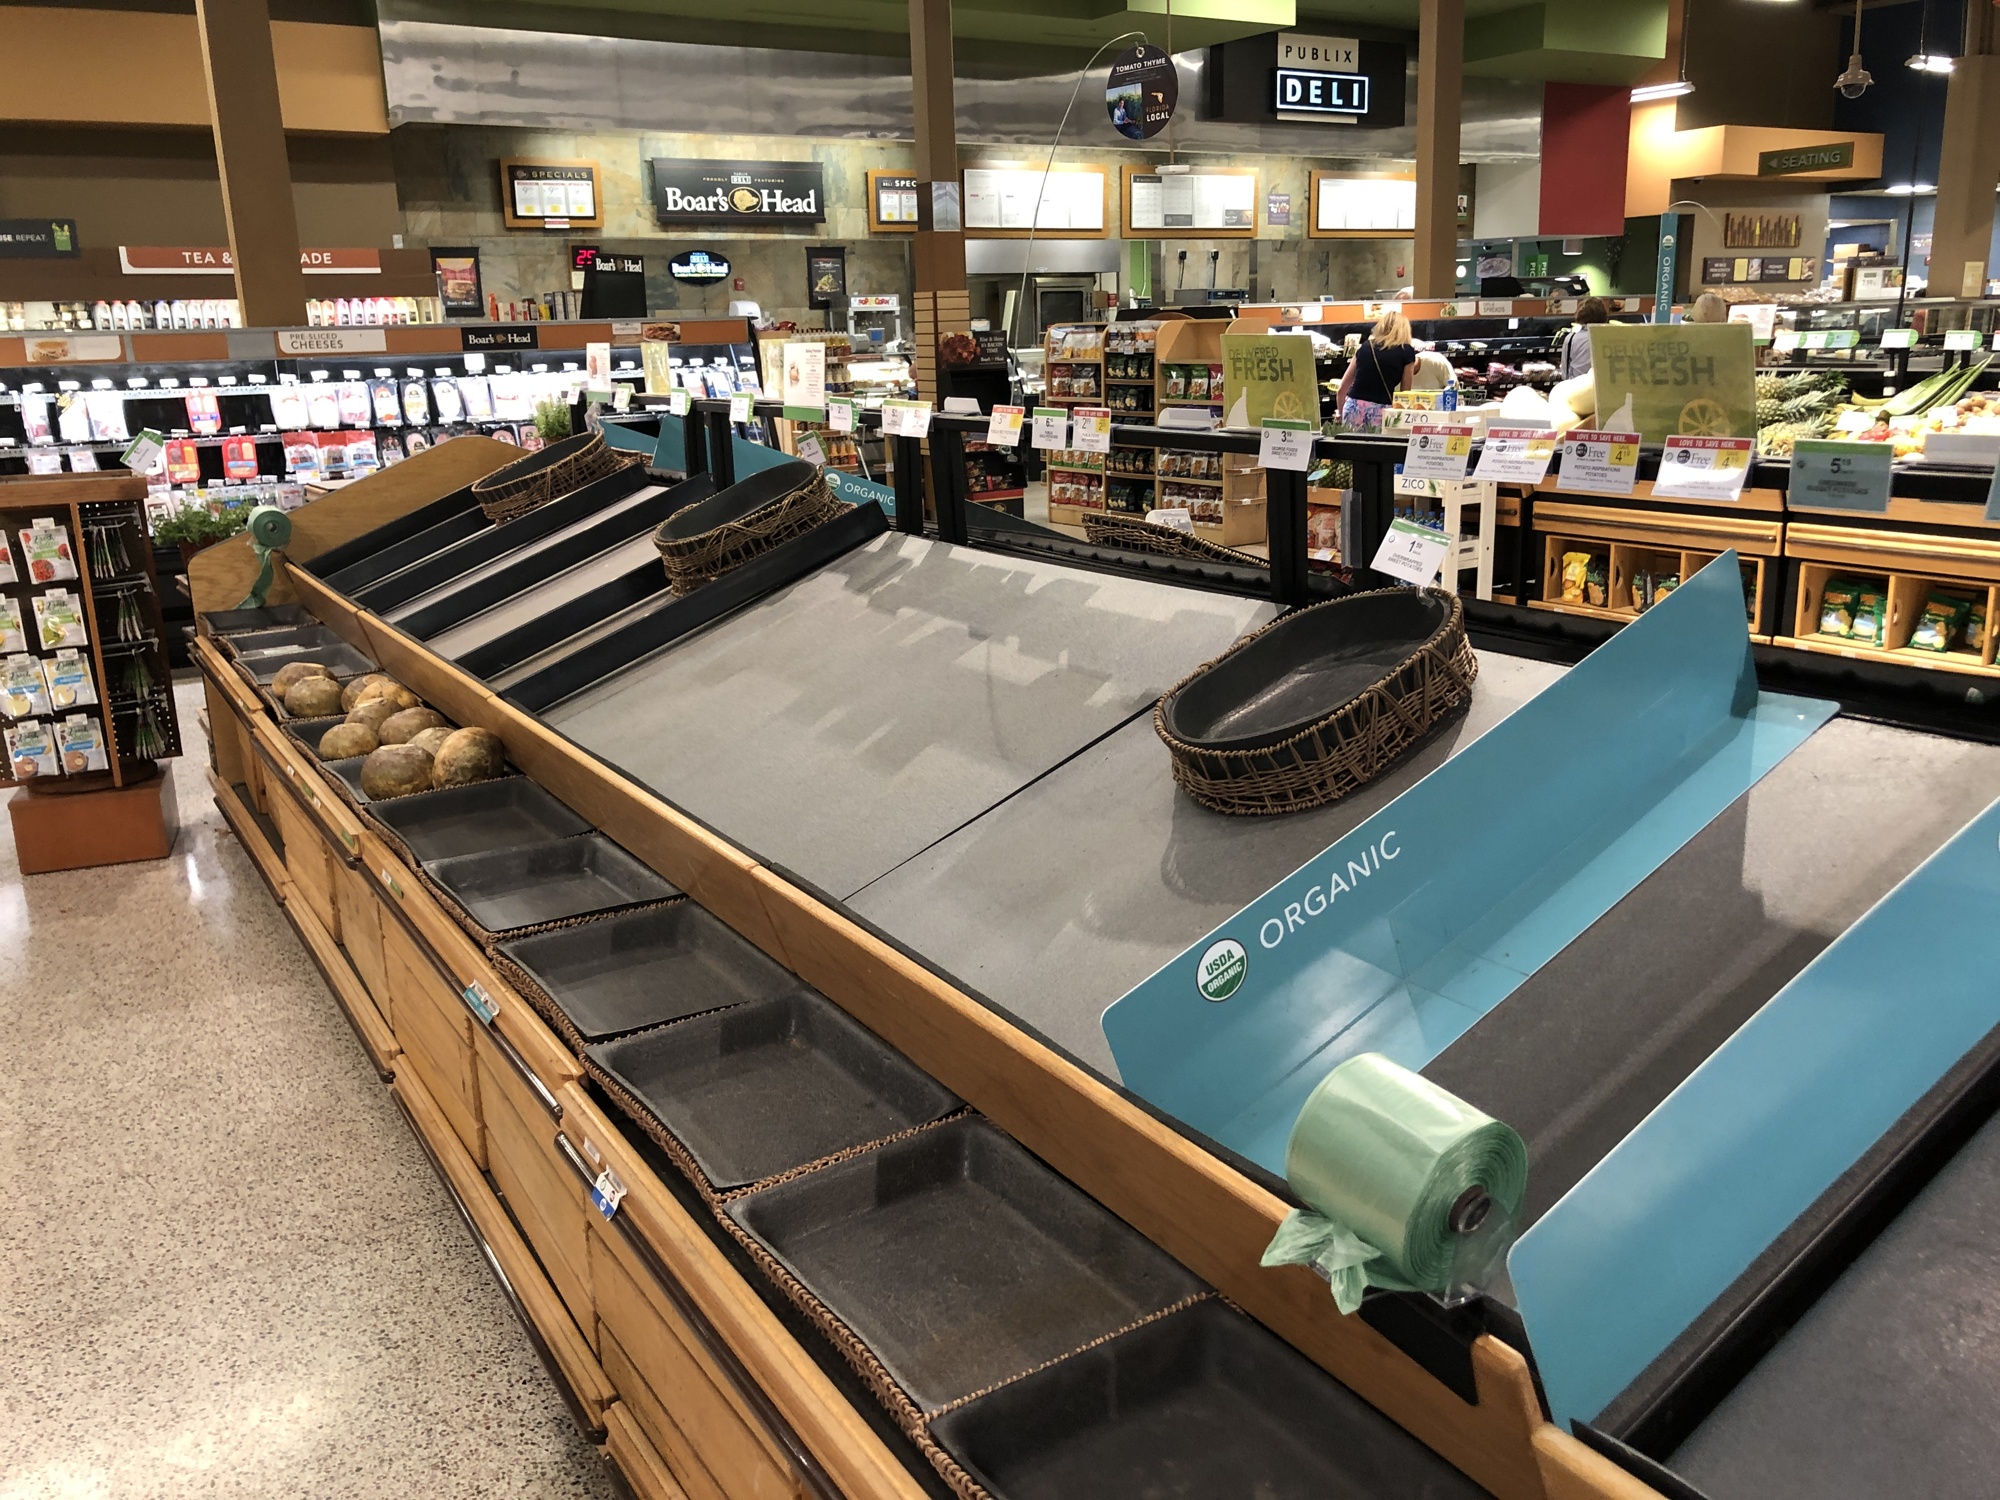 Produce shelves were largely bare for a while at Publix over the weekend.